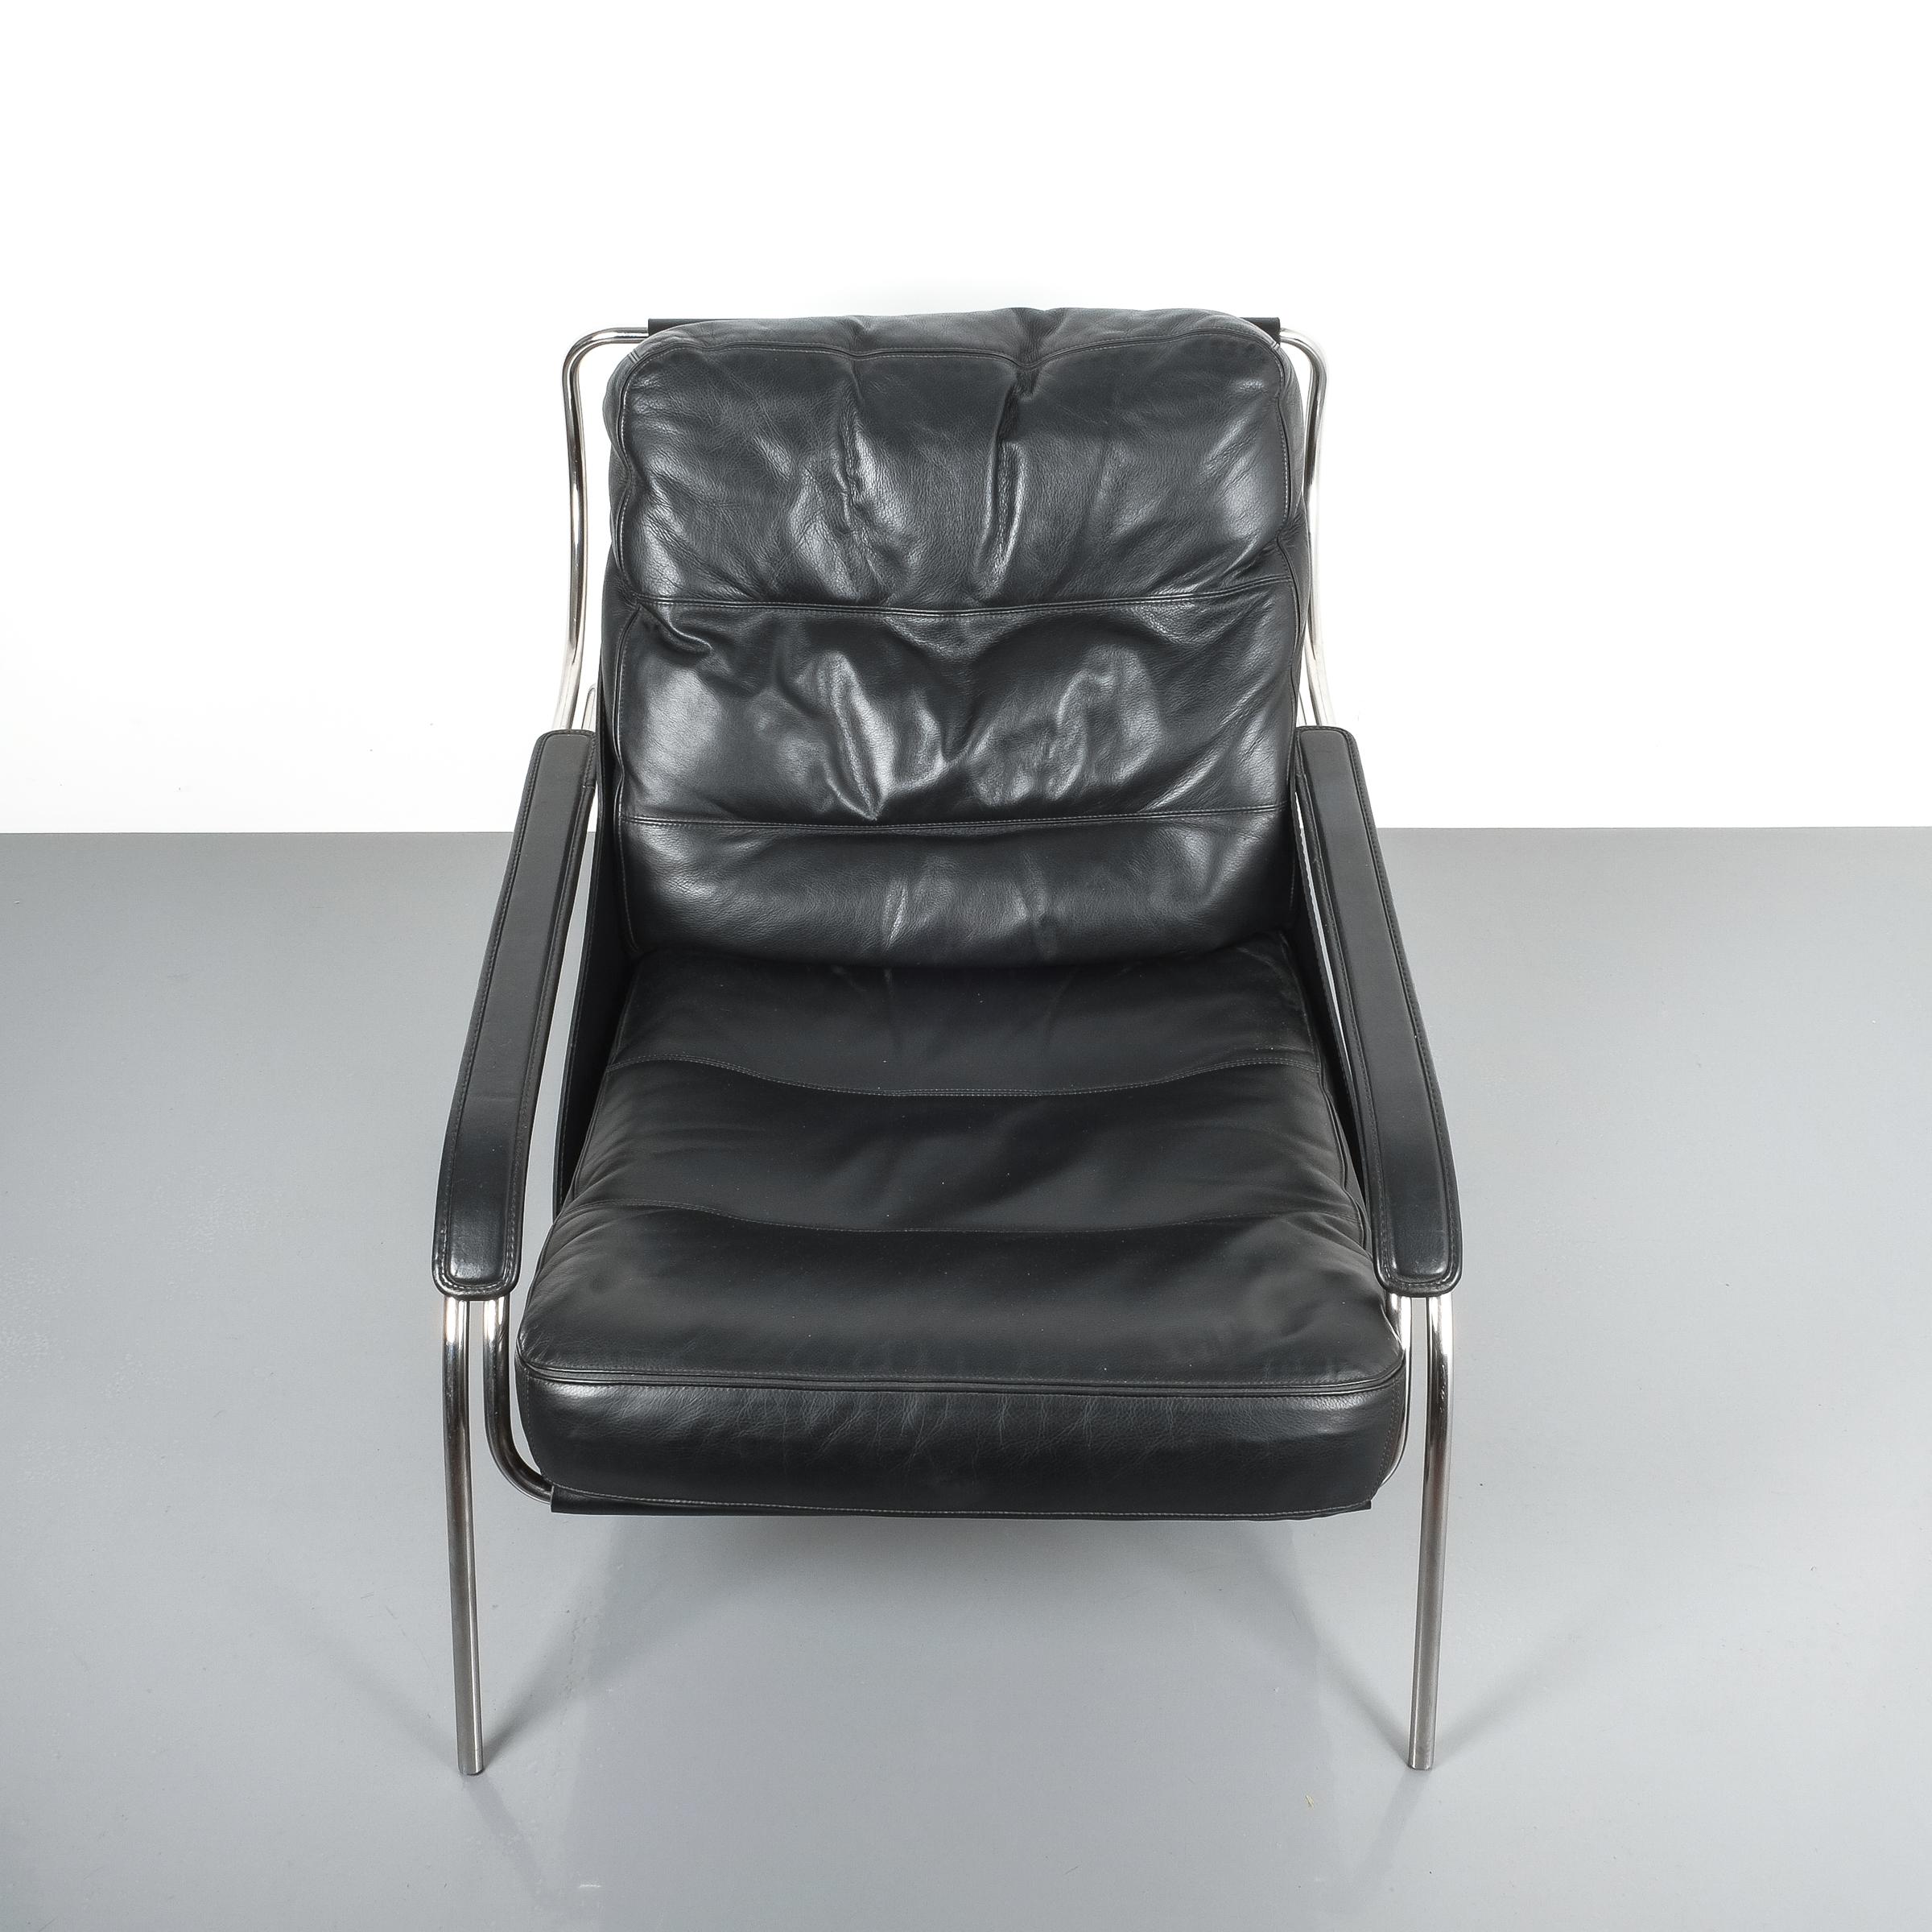 Mid-Century Modern Marco Zanuso Maggiolina Sling Black Leather Chair by Zanotta, 1947 For Sale